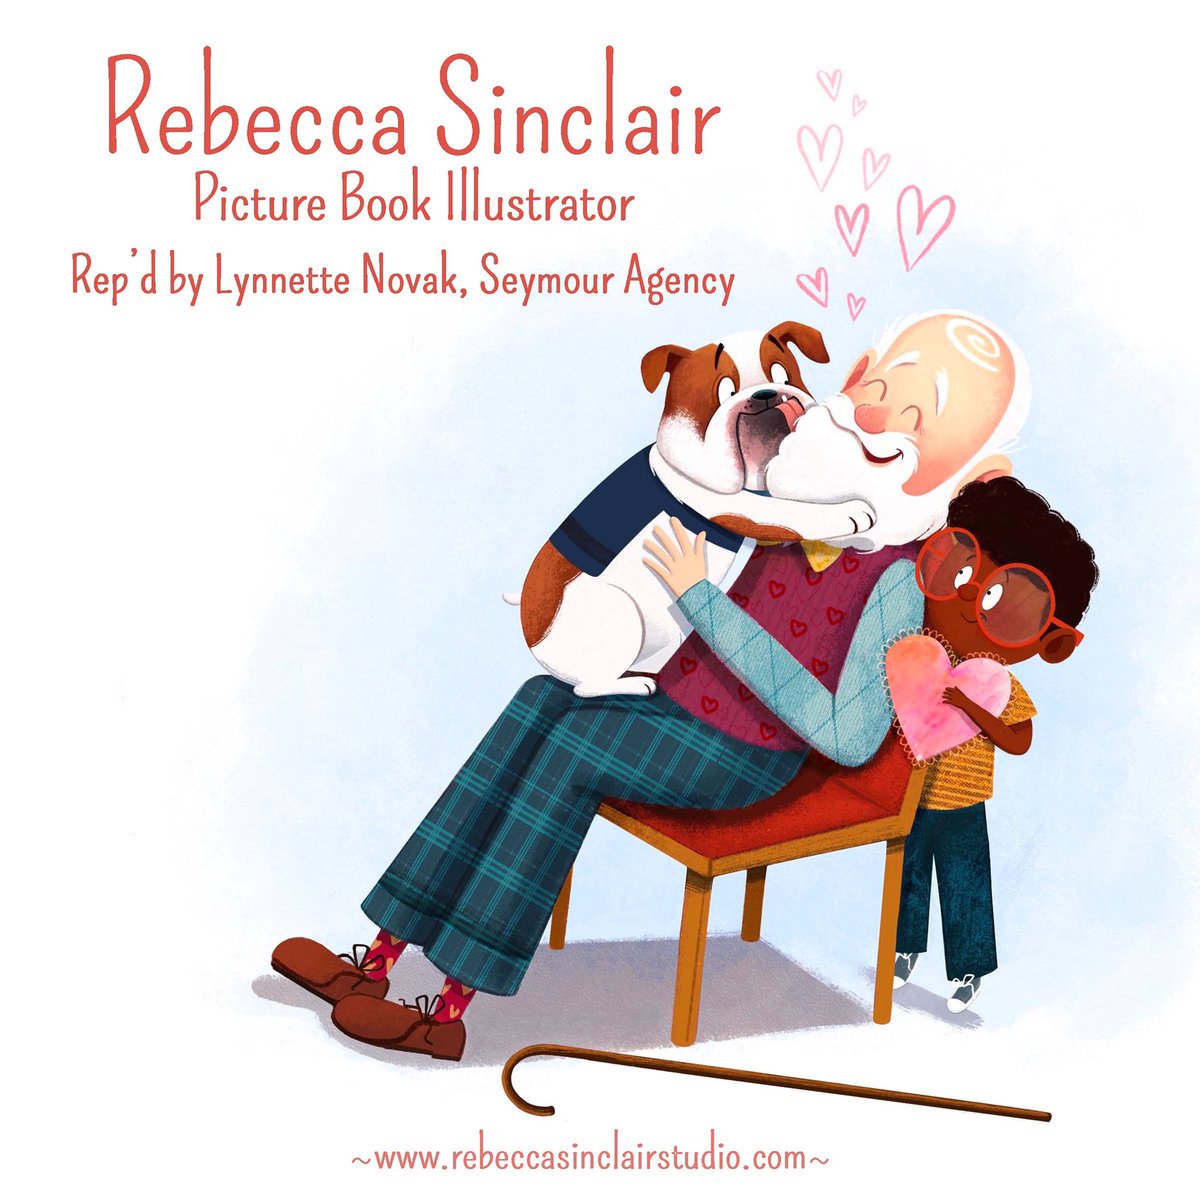 Sending out a big valentine for #kidlitartpostcard day! 💕 I’m Rebecca, a #kidlitartist who enjoys illustrating characters of all ages, especially the four-legged ones 💗 Rep’d by @Lynnette_Novak at @seymouragency 💼 rebeccasinclairstudio.com